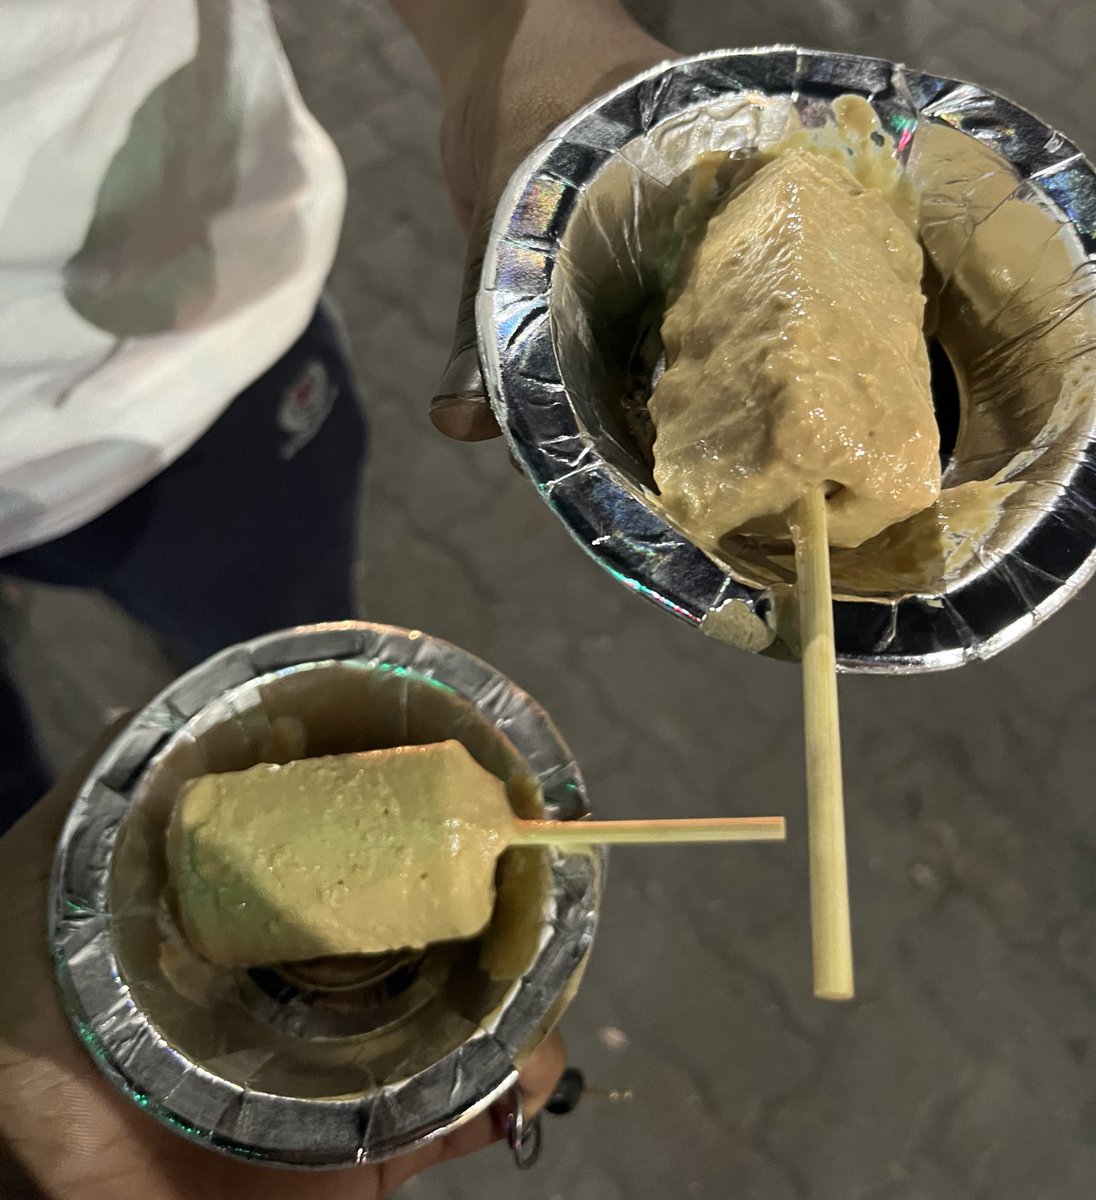 whoever created kulfi deserves all the good things in the world